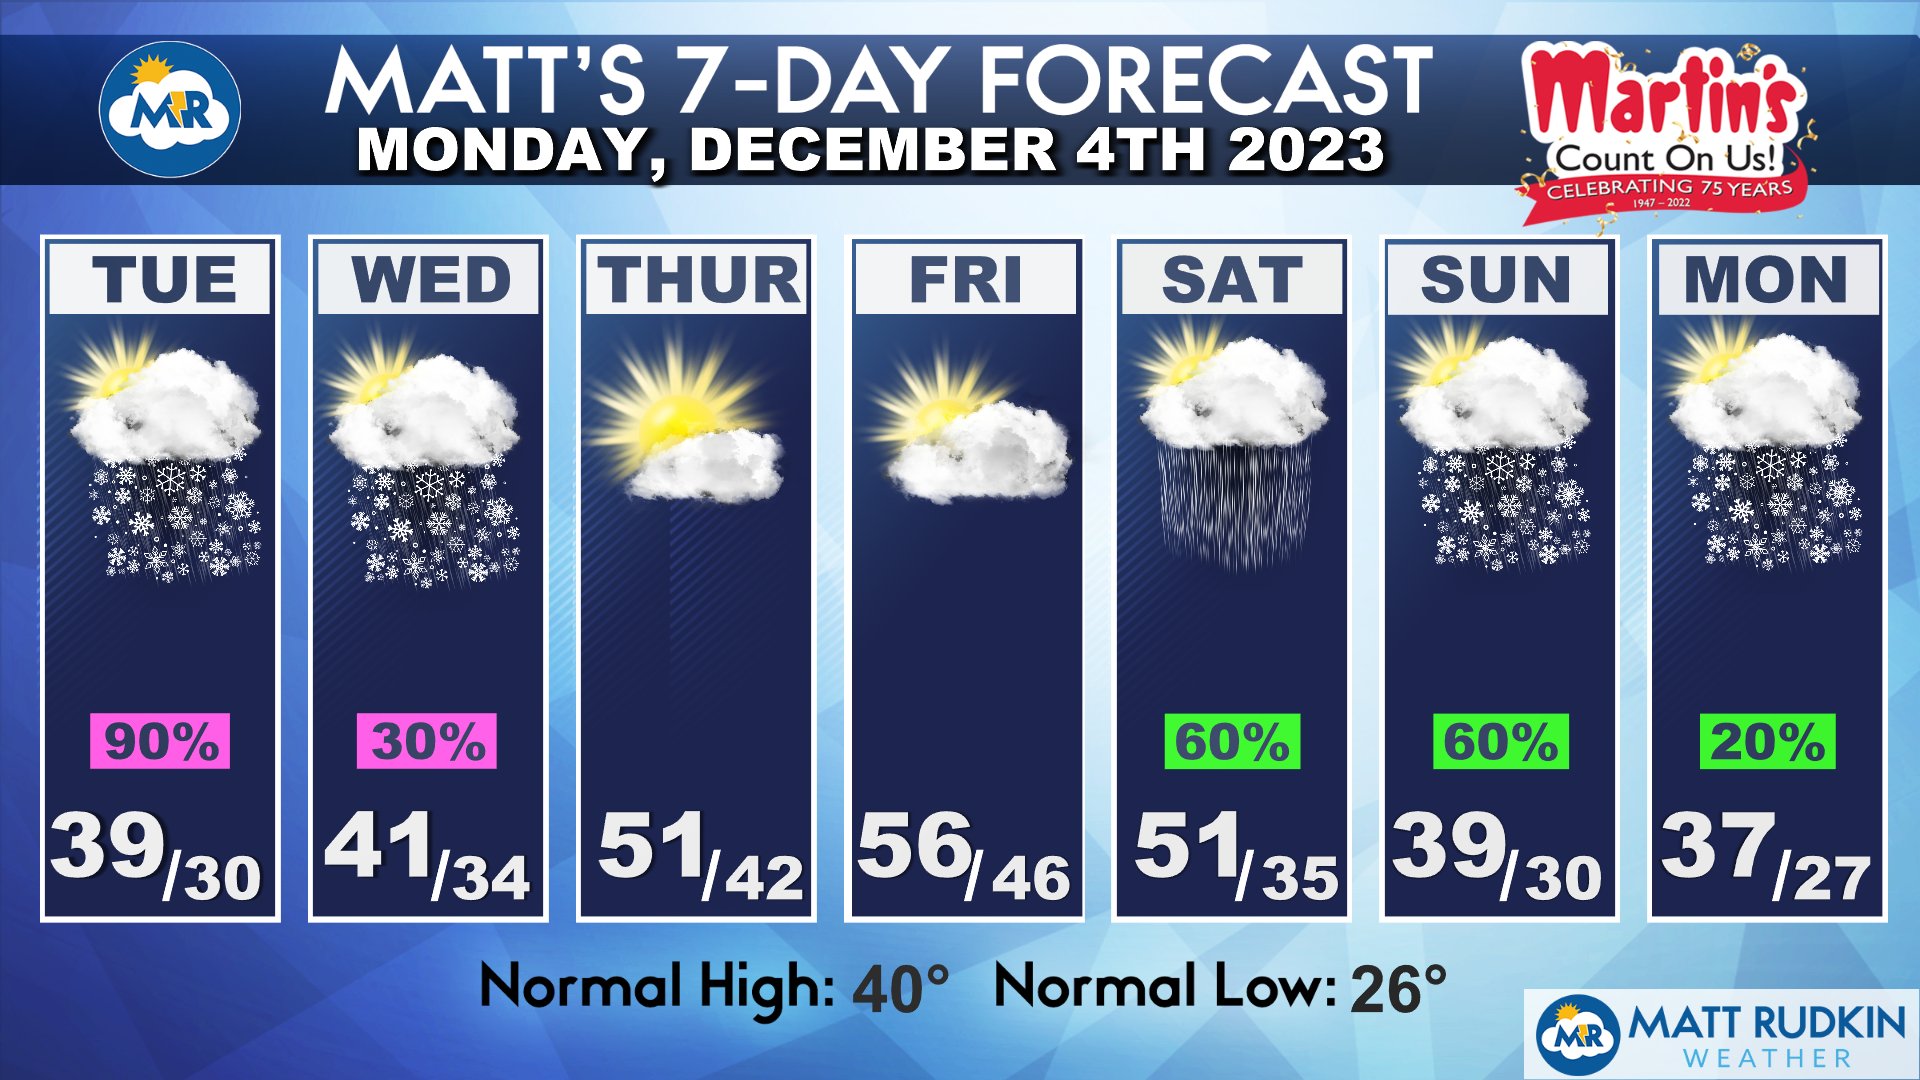 Matt Rudkin on X: An active 7-day forecast ahead that starts and